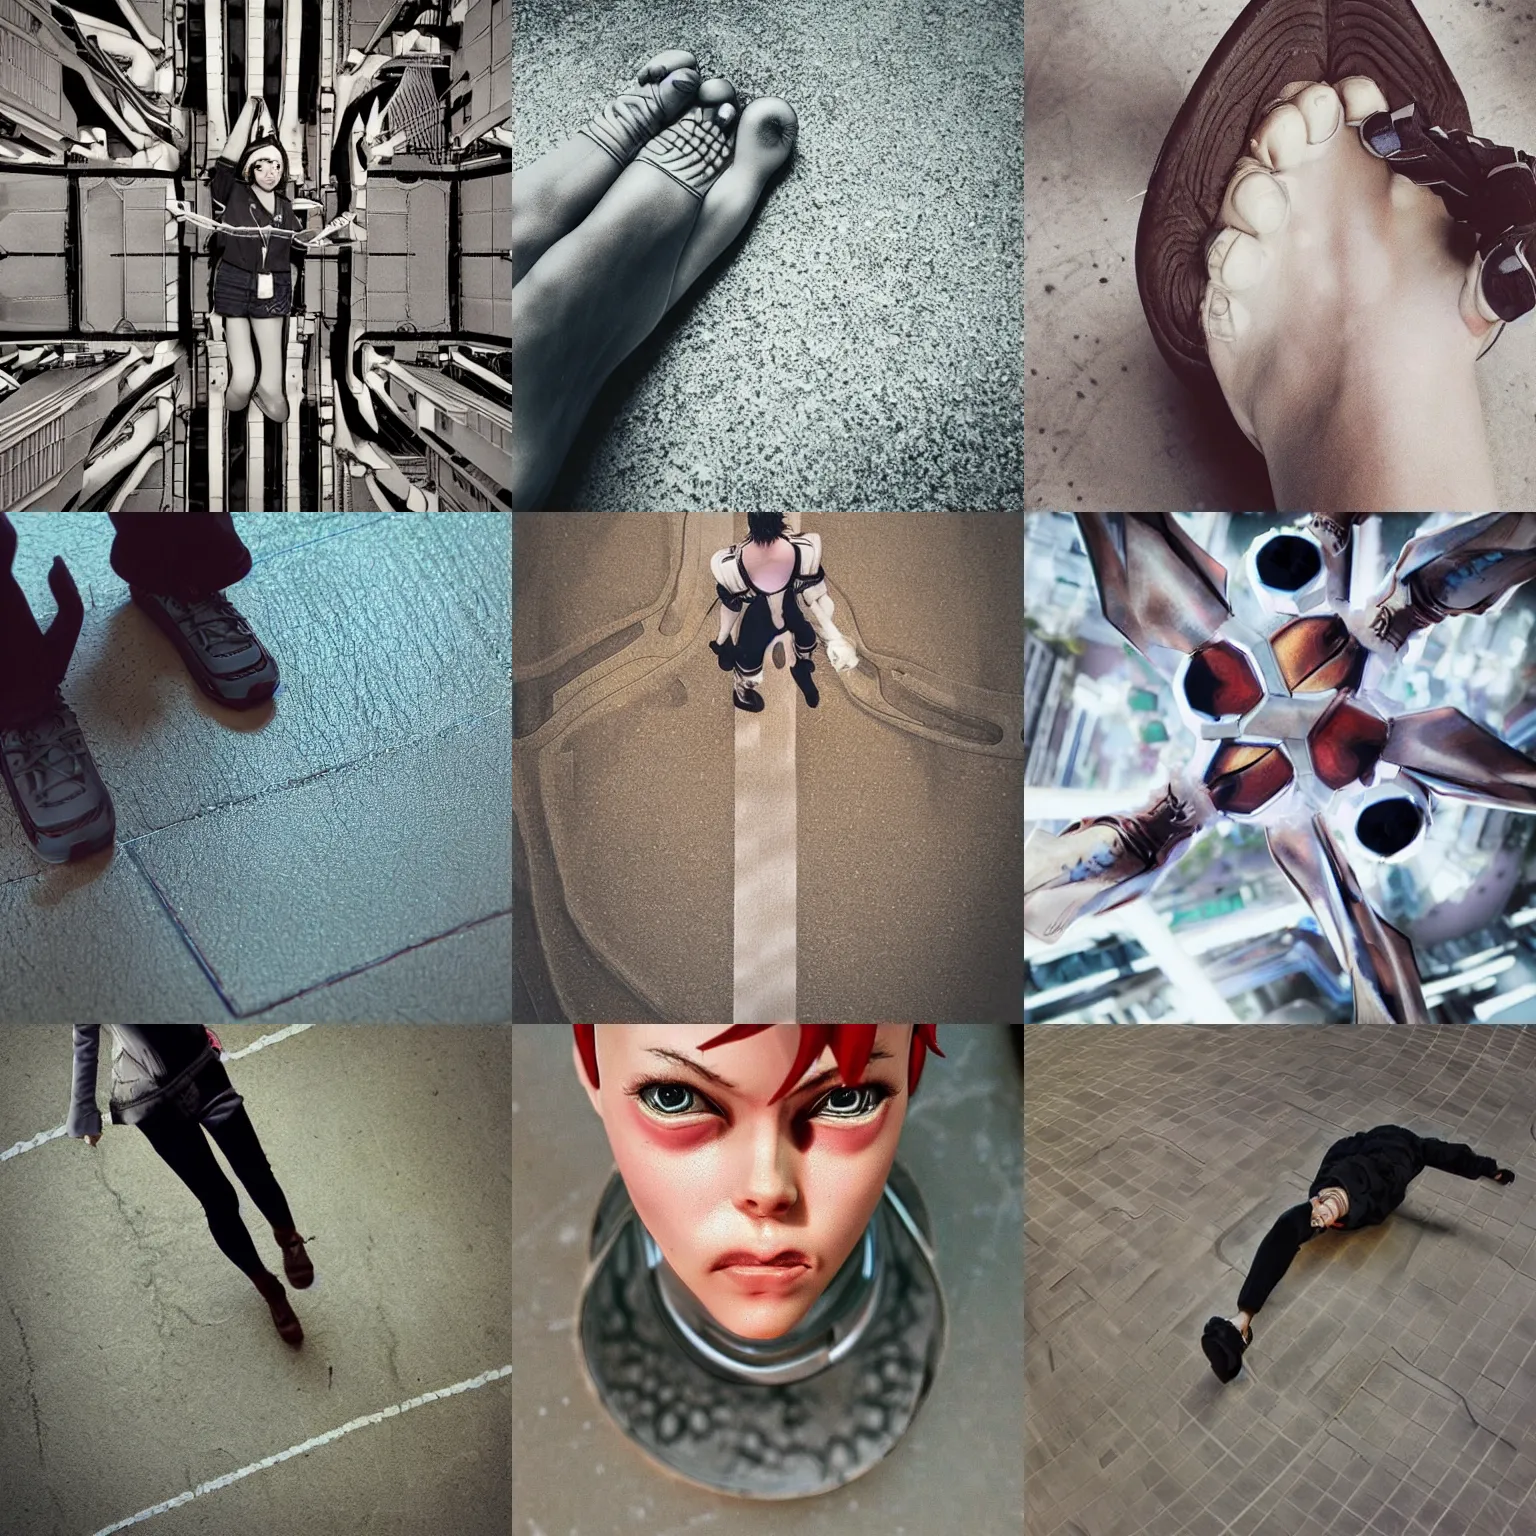 Prompt: beautiful overhead perspective extreme closeup portrait photo in style of 1990s frontiers in 1/6 scale art figure model retrofuturism french seinen manga street fashion photography wachowski edition, focus on feet, eye contact, highly detailed, soft lighting